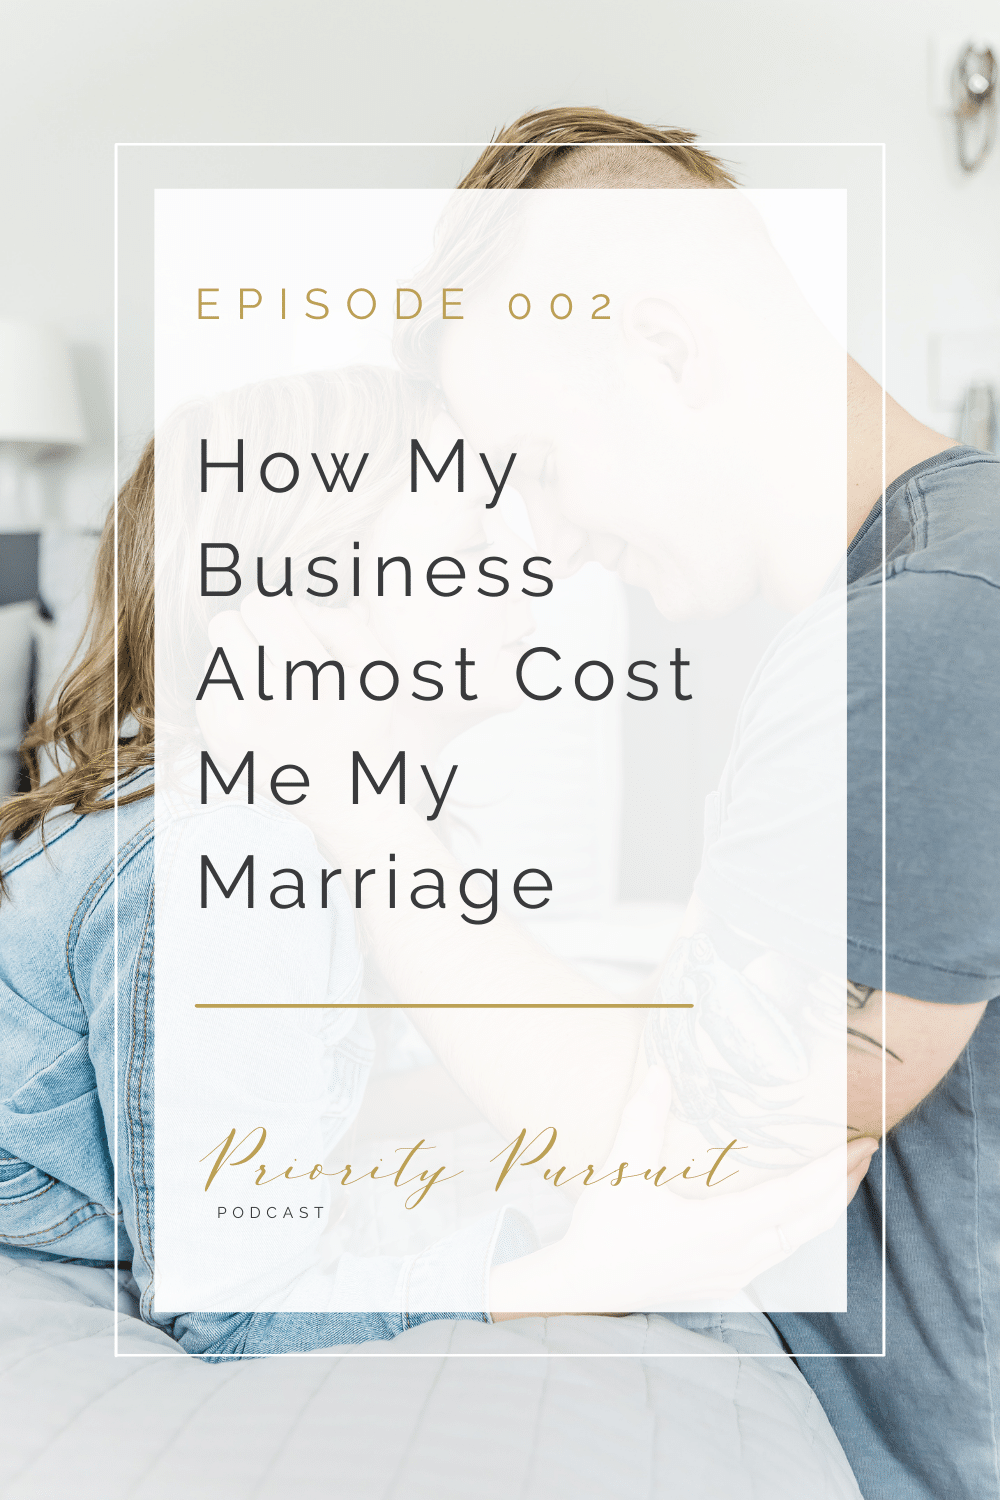 Episode 002 of The Priority Pursuit Podcast explains how my business almost cost me my marriage and how you can protect your most important relationships from your business